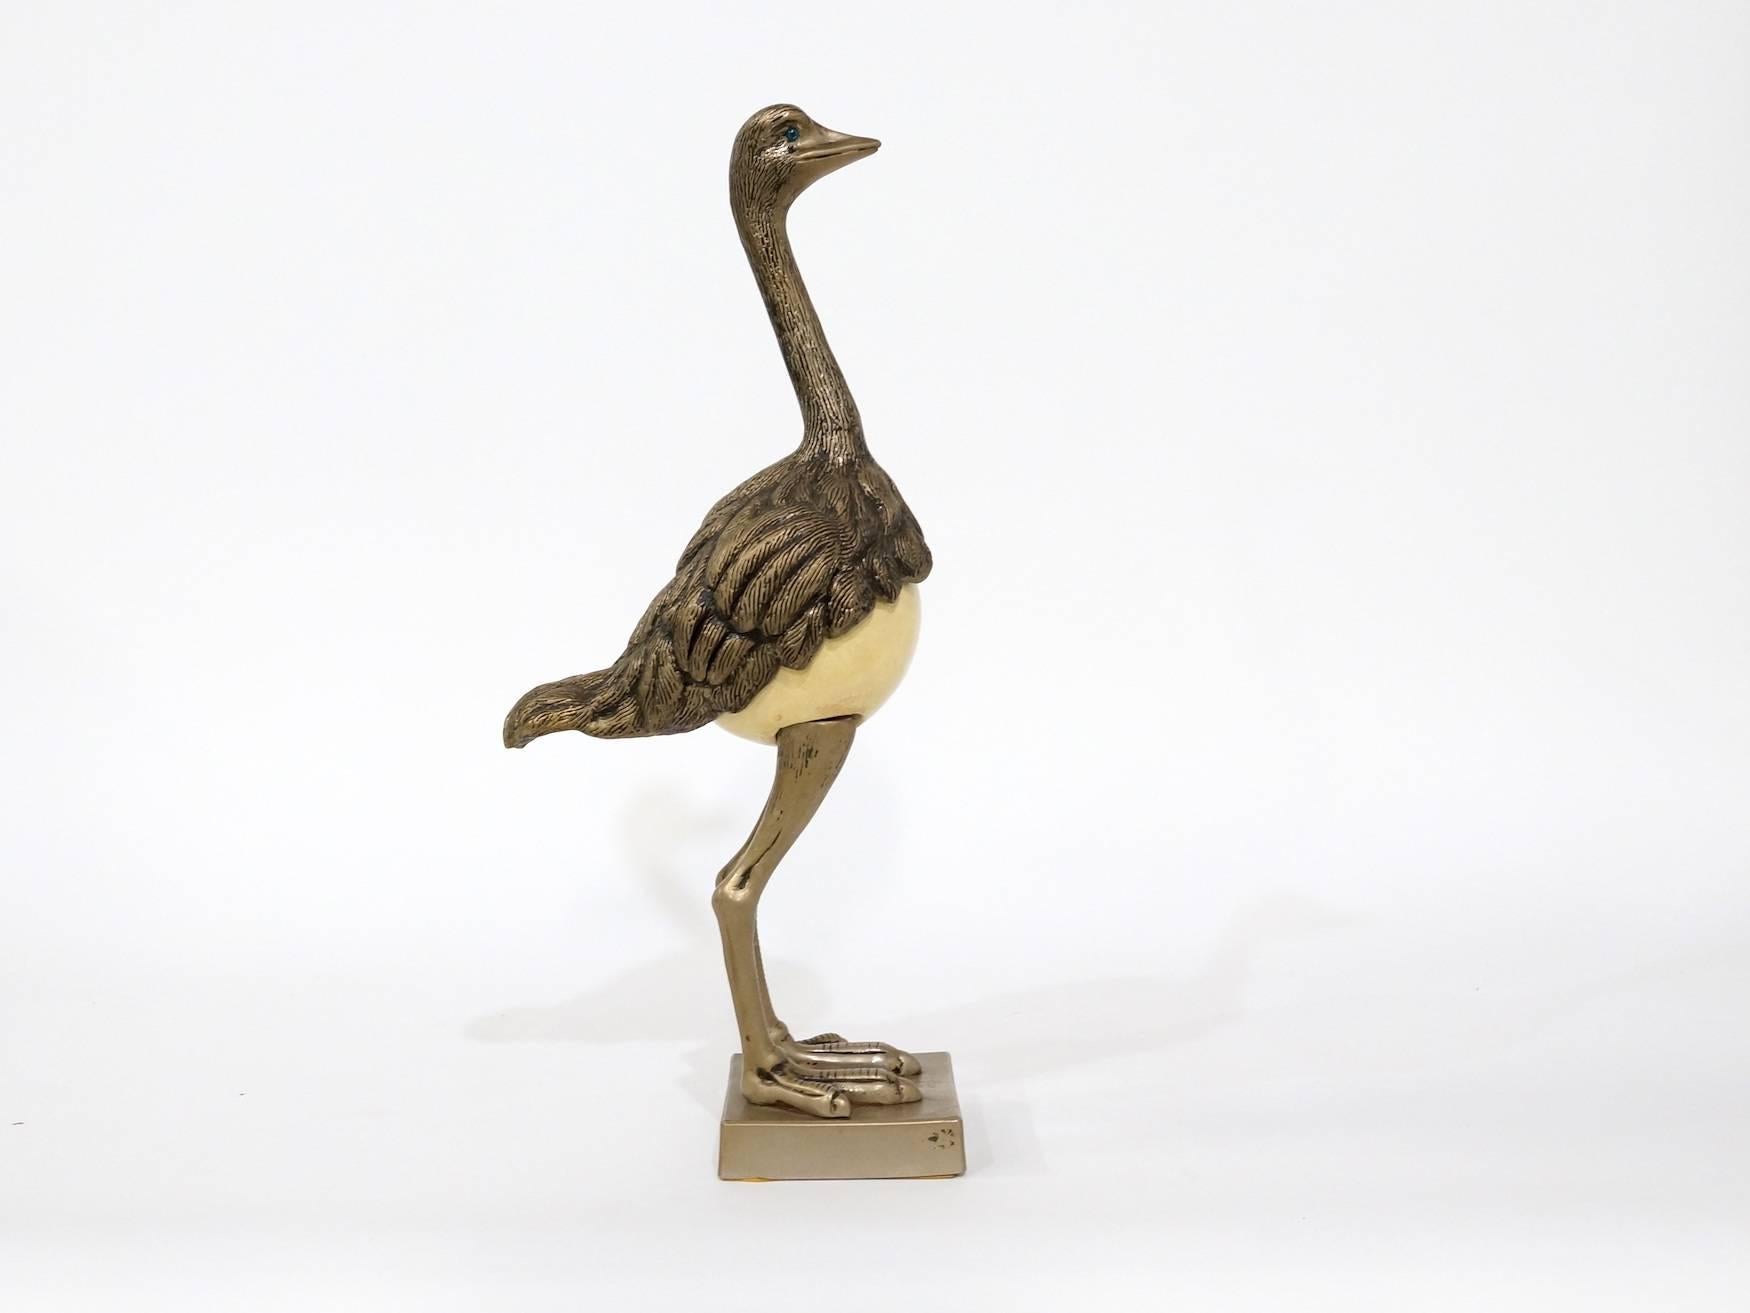 Brass decorative struzzi in the style of Gabriella Crespi
French, 1970s brass ostrich sculpture with ostrich egg.
This is a really lovely, charming piece of sculpture. There is something very beguiling about it. It feels weighty and high quality.